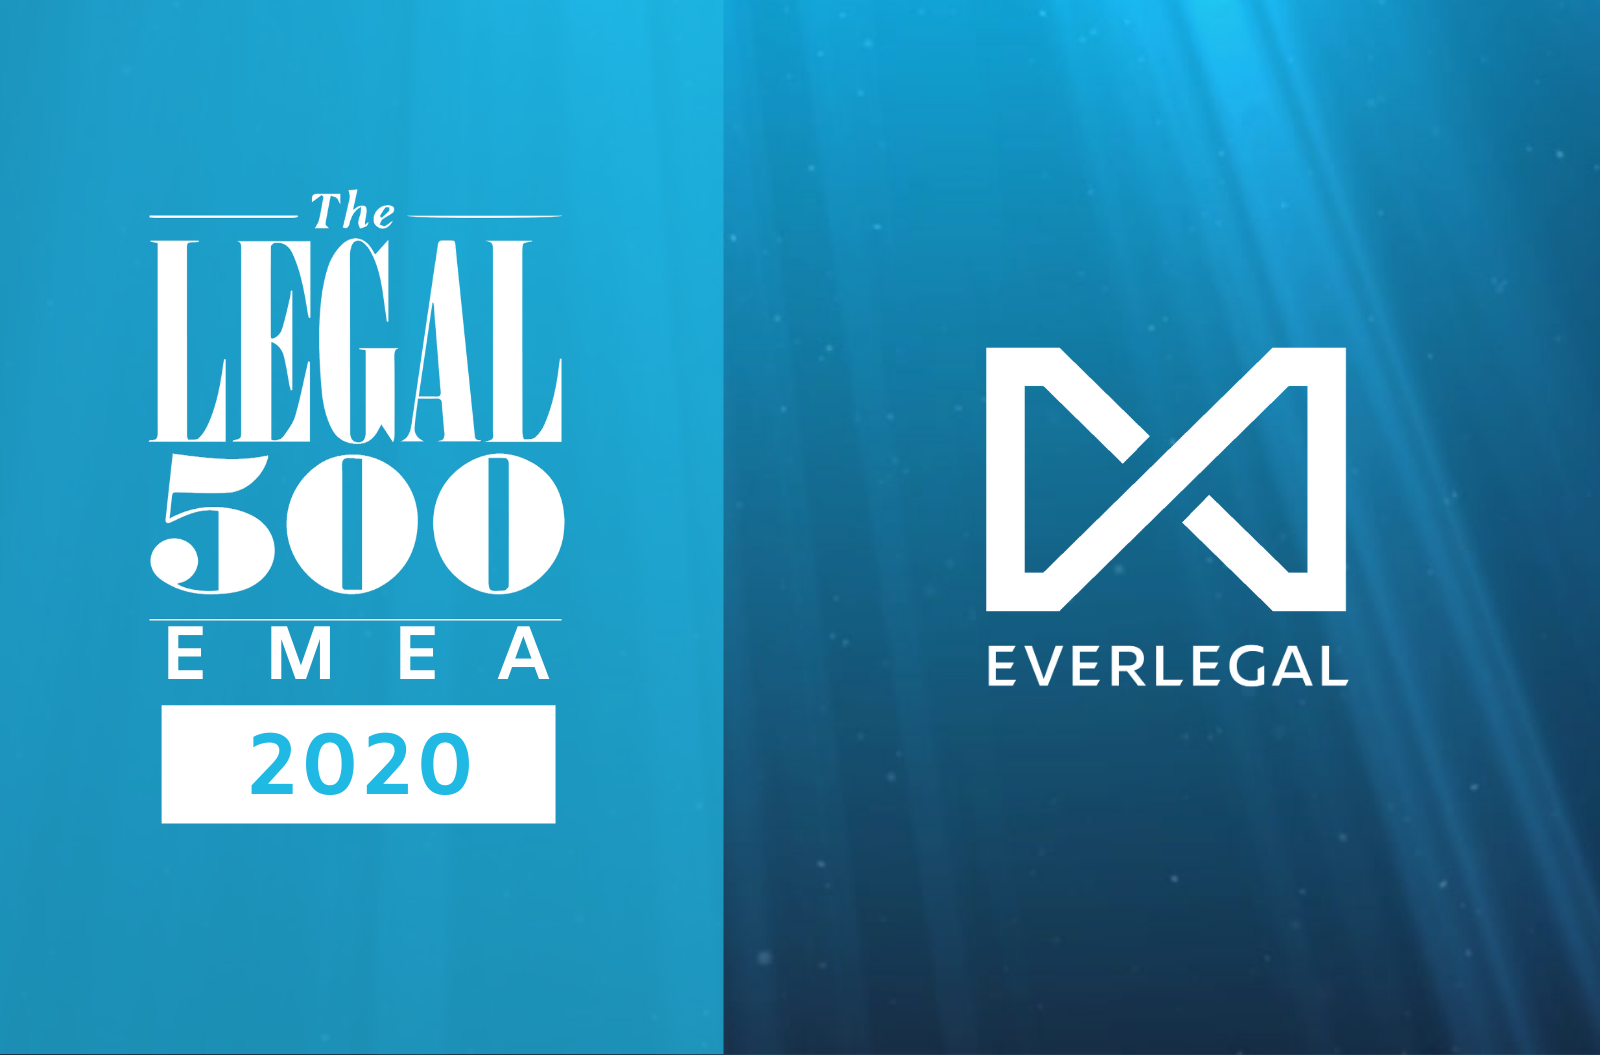 EVERLEGAL - continuously highly ranked in the released edition of the Legal 500 EMEA 2020